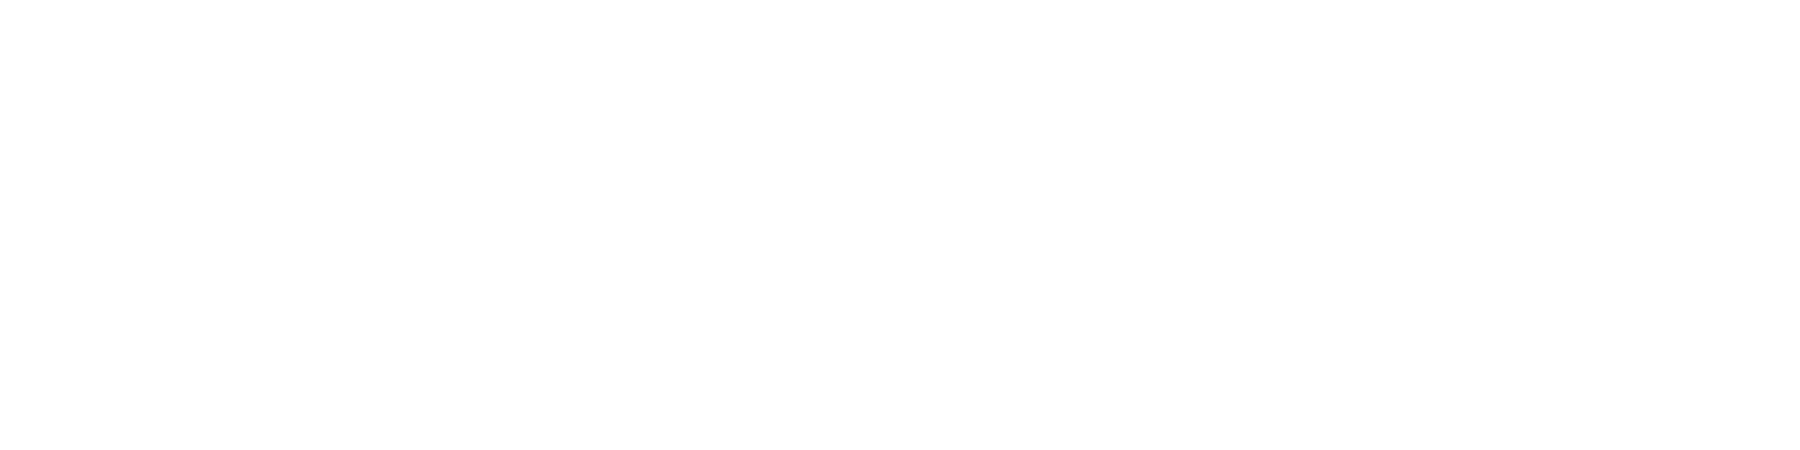 Covalent North_logo_FINAL_WB.png